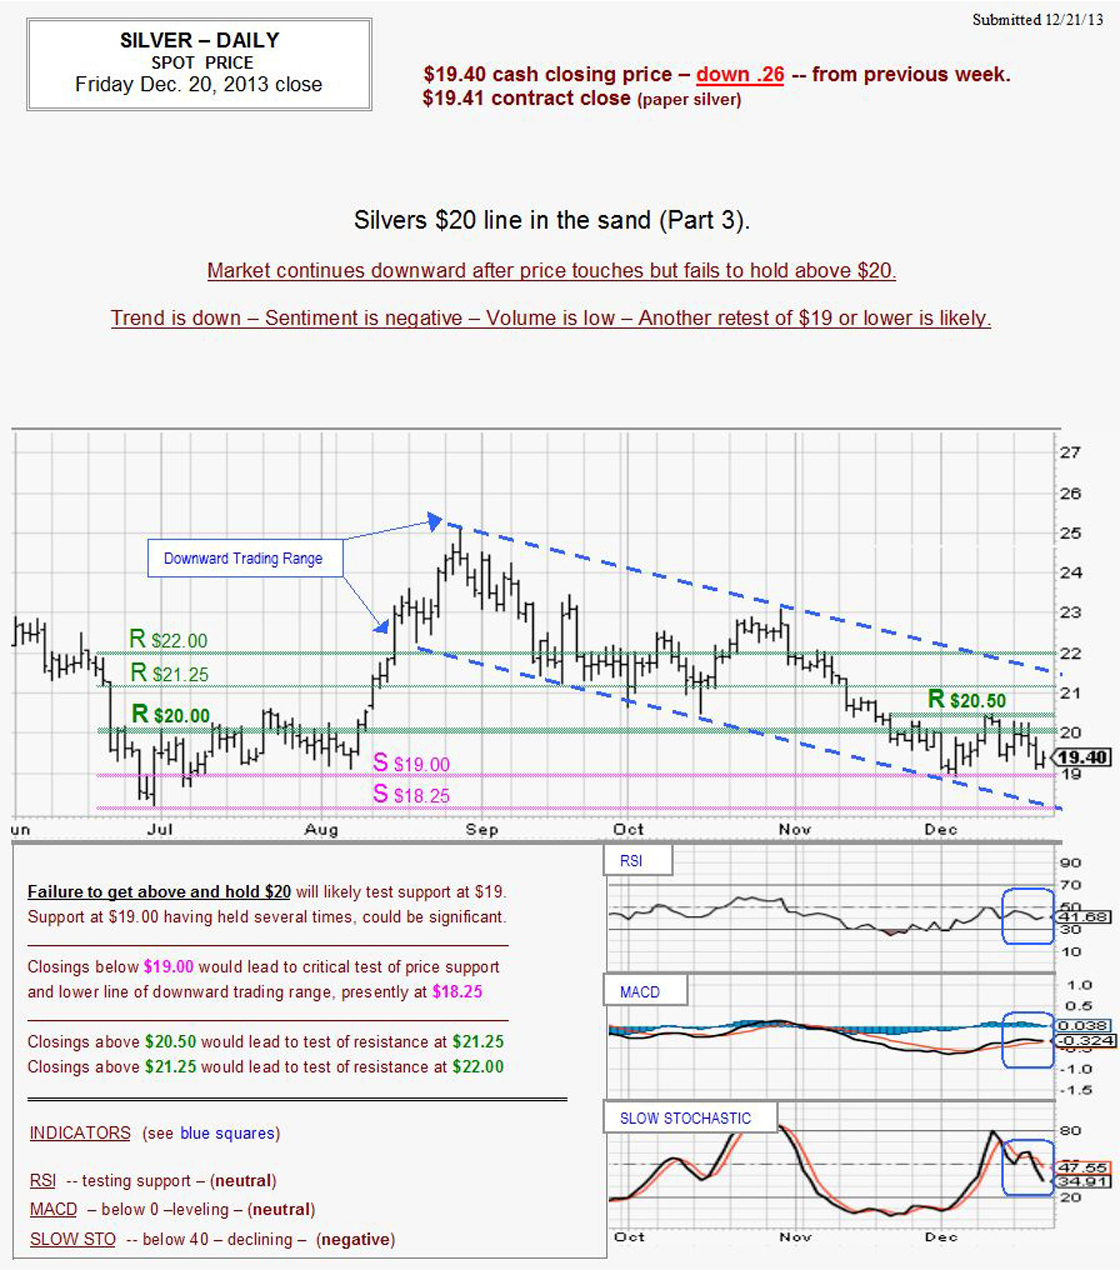 Dec 20, 2013 chart & commentary